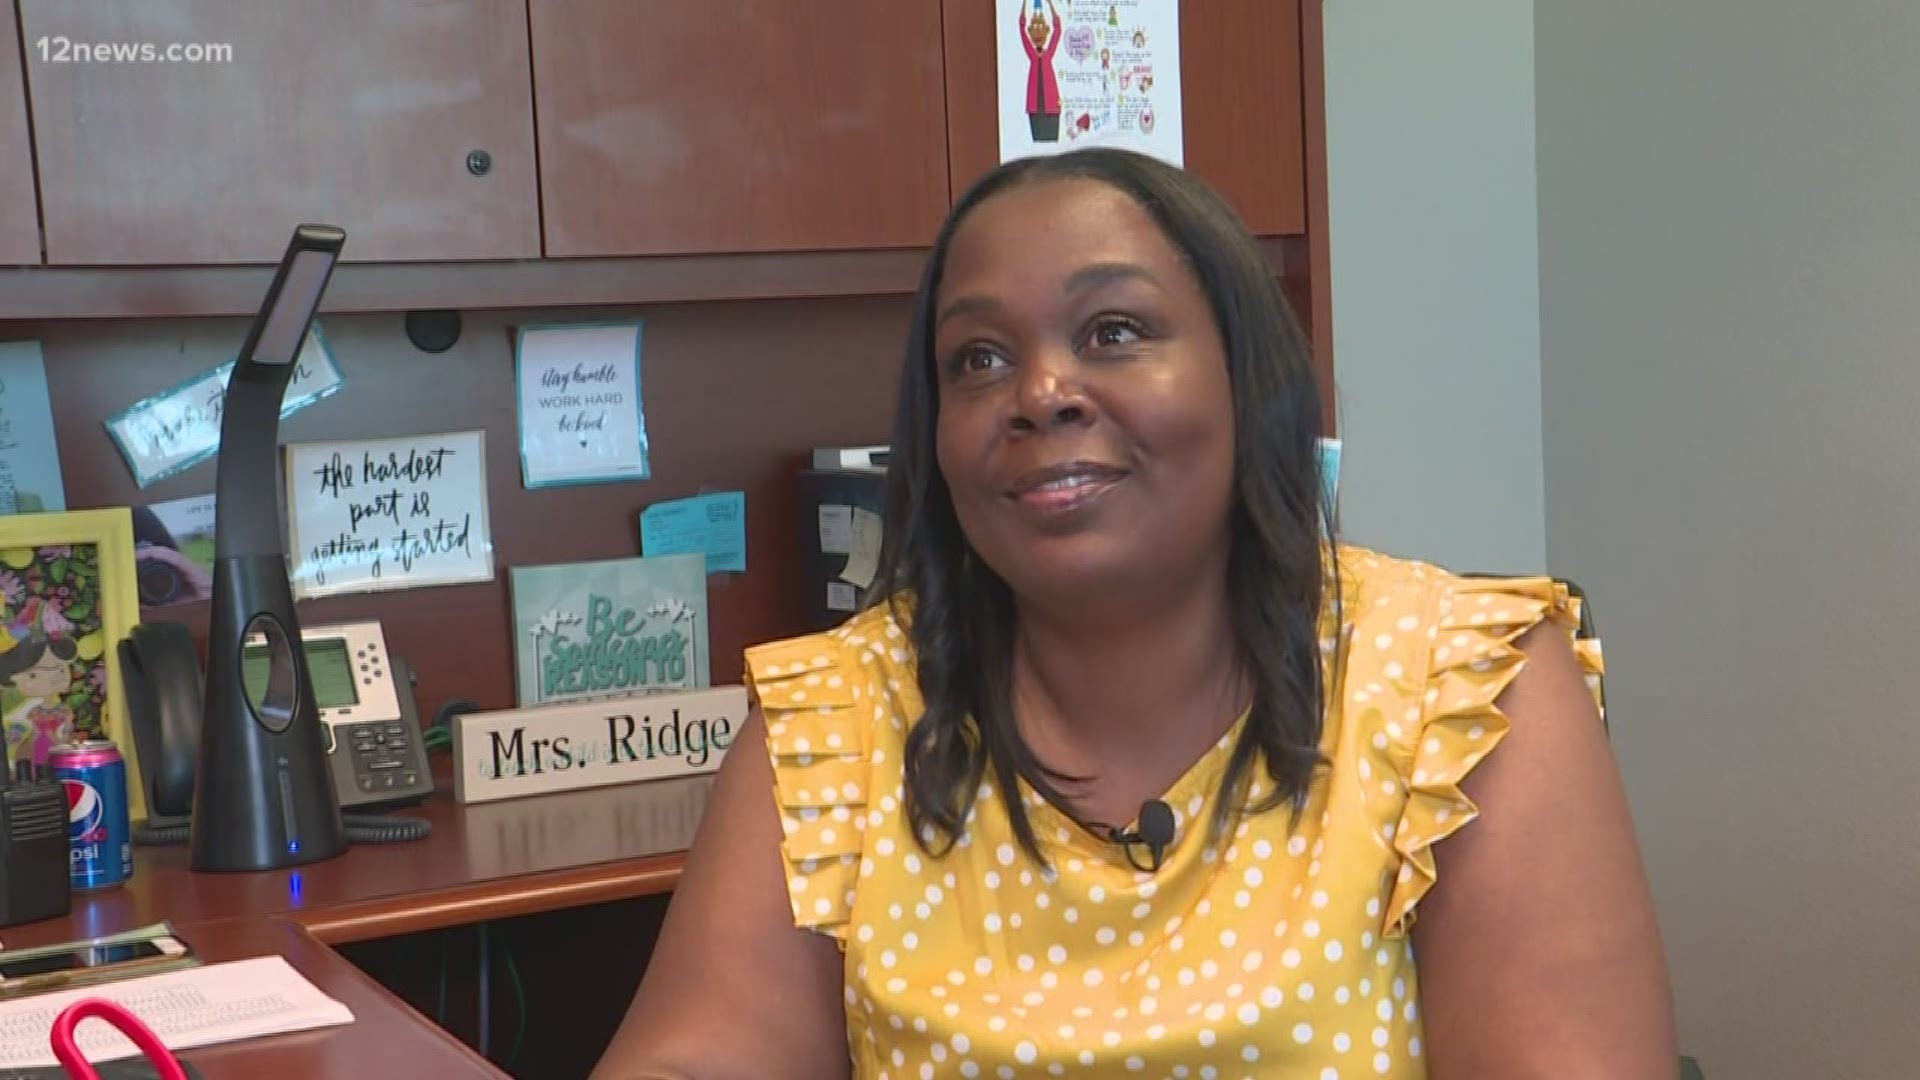 At a back to school event at J.O. Combs Middle School, a grandparent of one the student's began to choke on a piece of food. The school's principal, Laura Ridge, stepped up to save the woman's life and she's now being hailed as a hero.